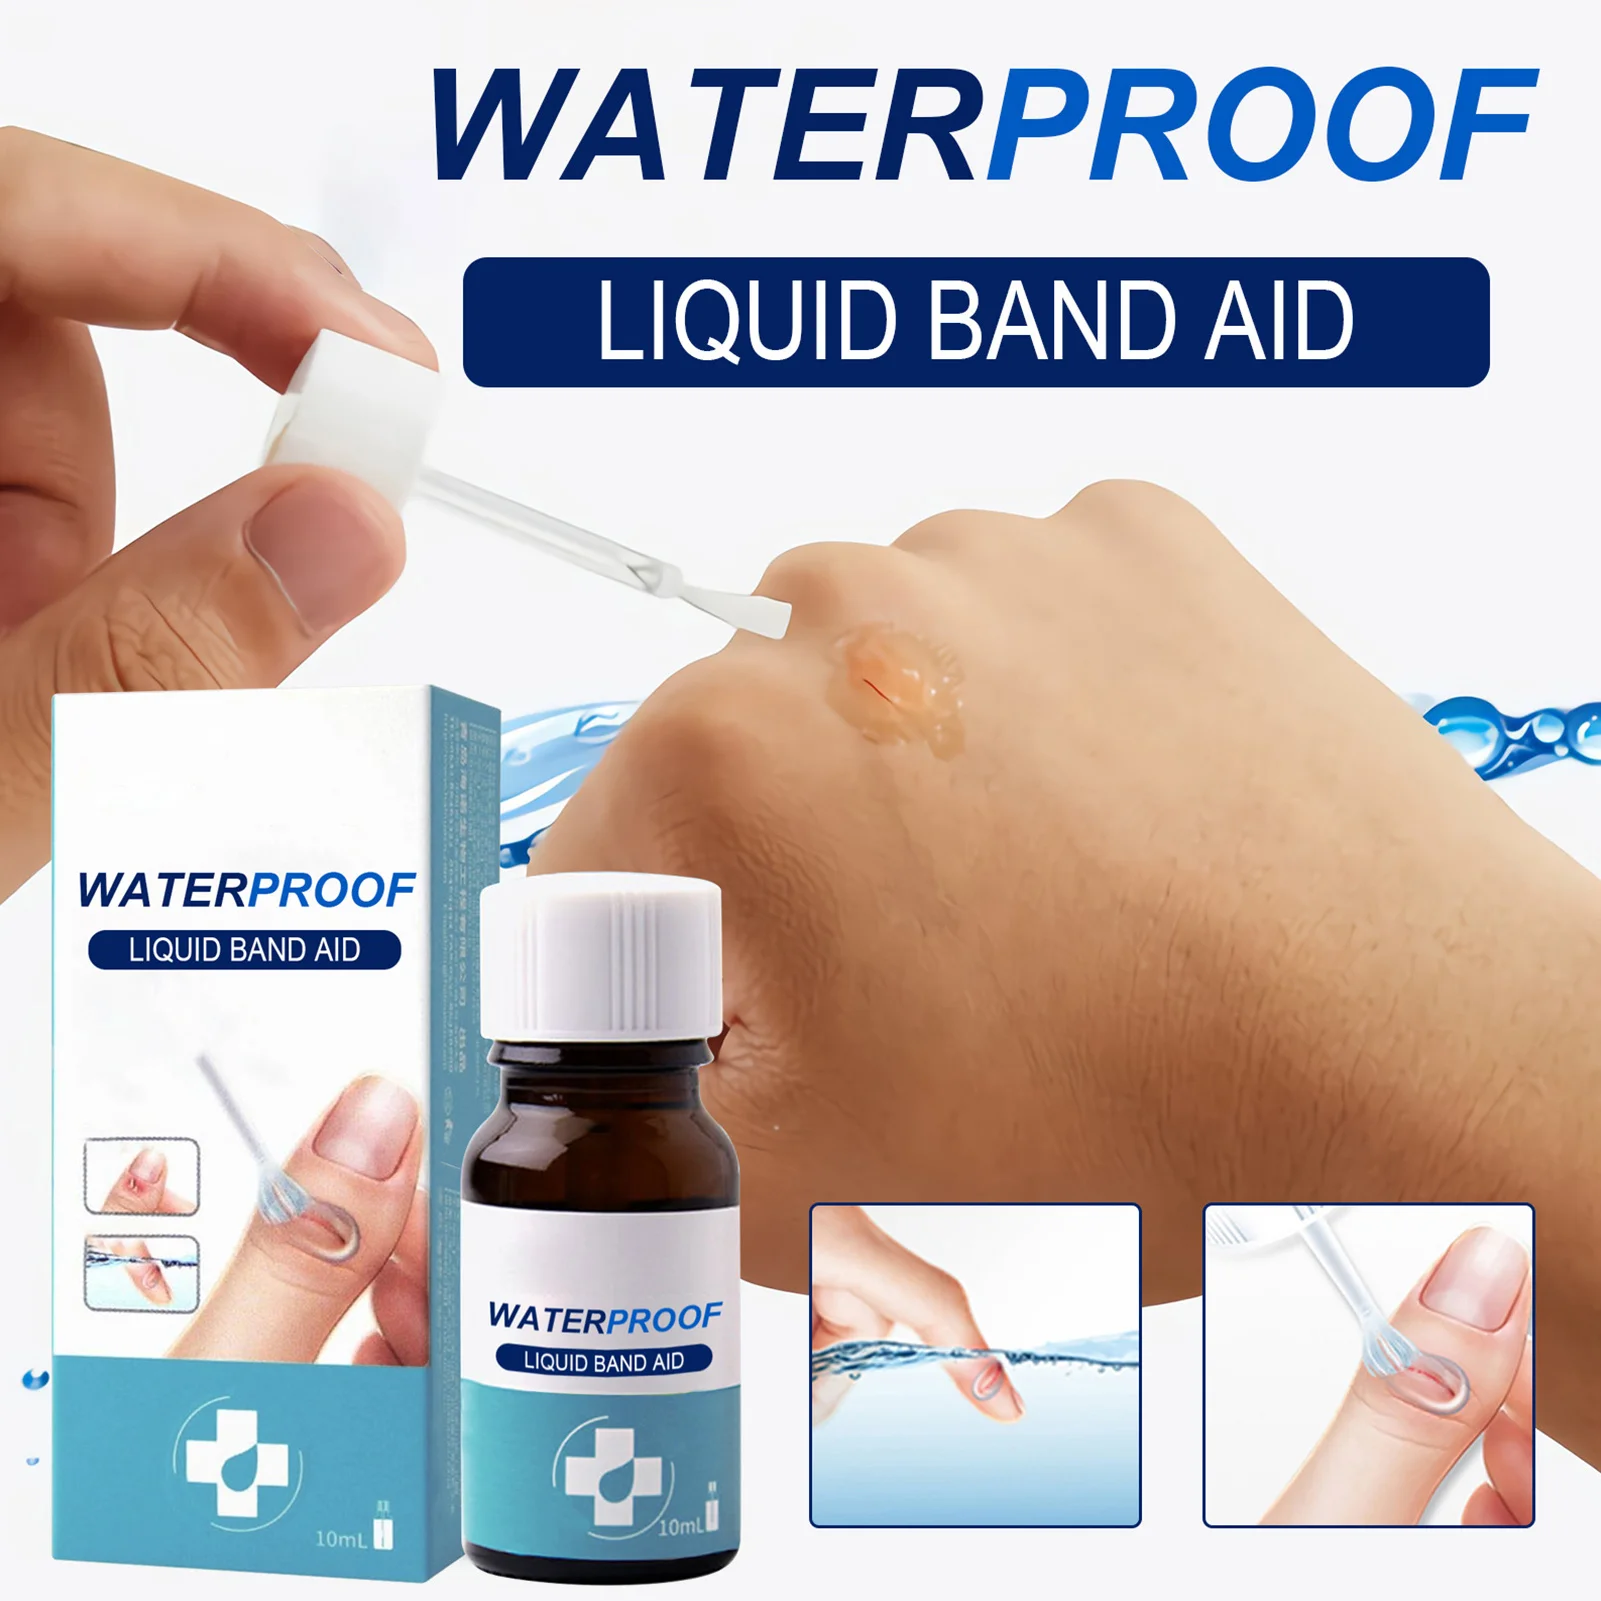 

10ml Liquid Bandage Medical Disinfecting Adhesive Hemostasis Plaster Waterproof First Aid for Small Cut Wounds Healing Gel Patch